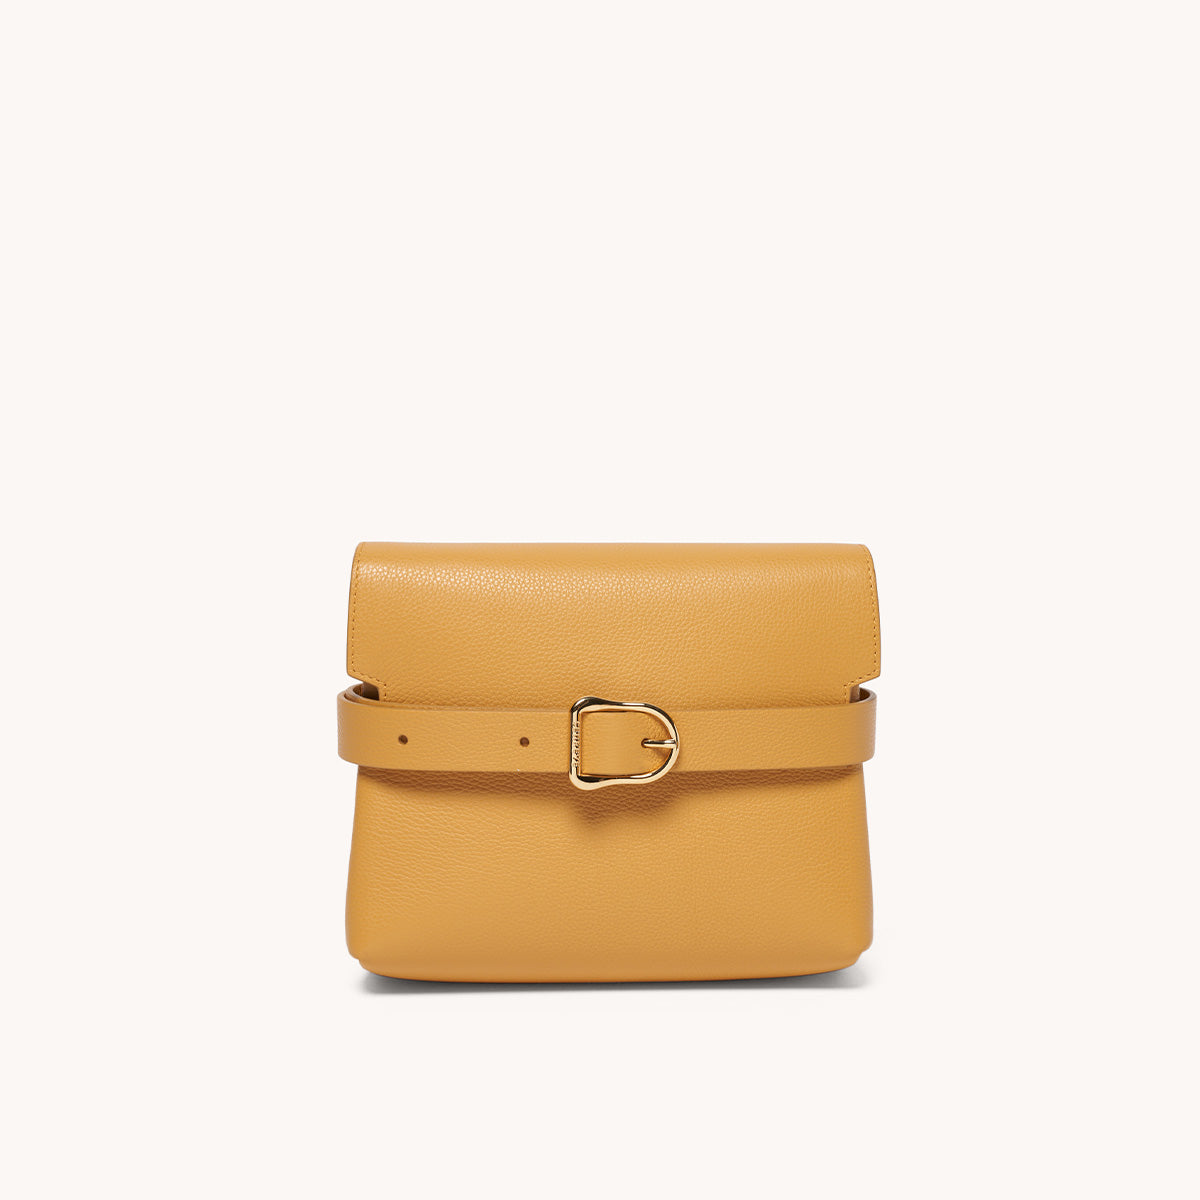 Designer Bags Are Up to 75% Off at Senreve's Sale